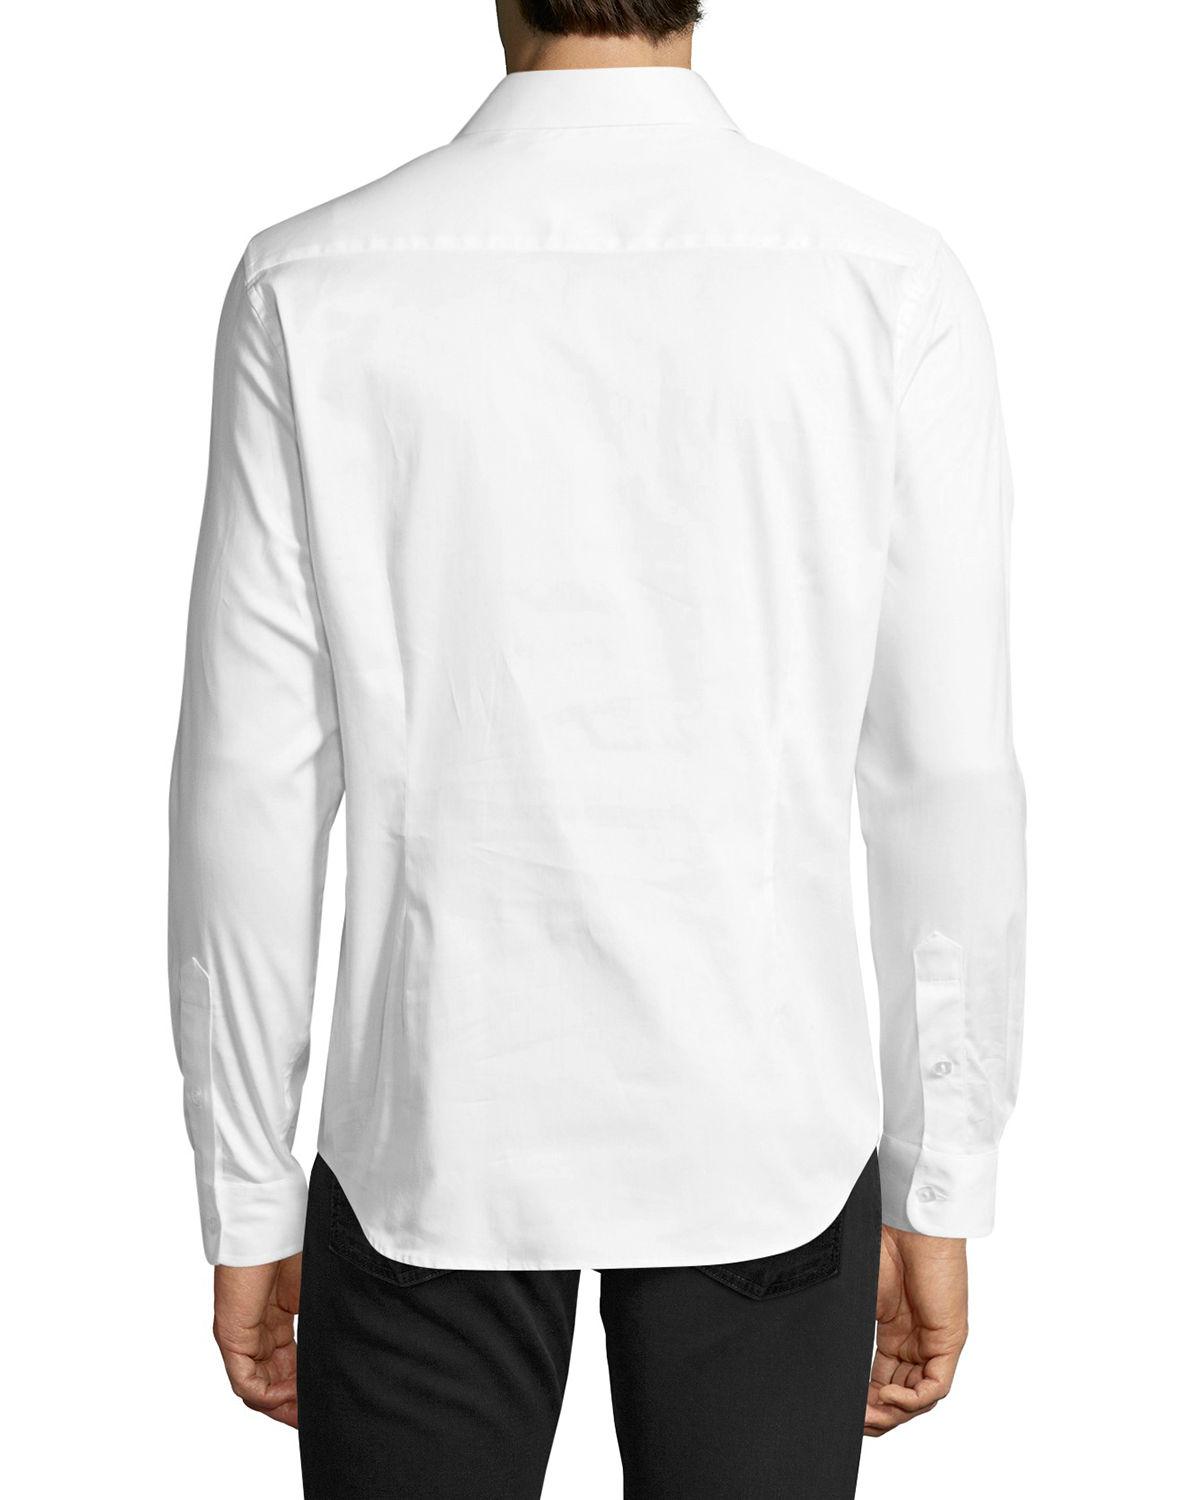 Karl Lagerfeld Cotton Contrast-front Woven Shirt in White for Men - Lyst